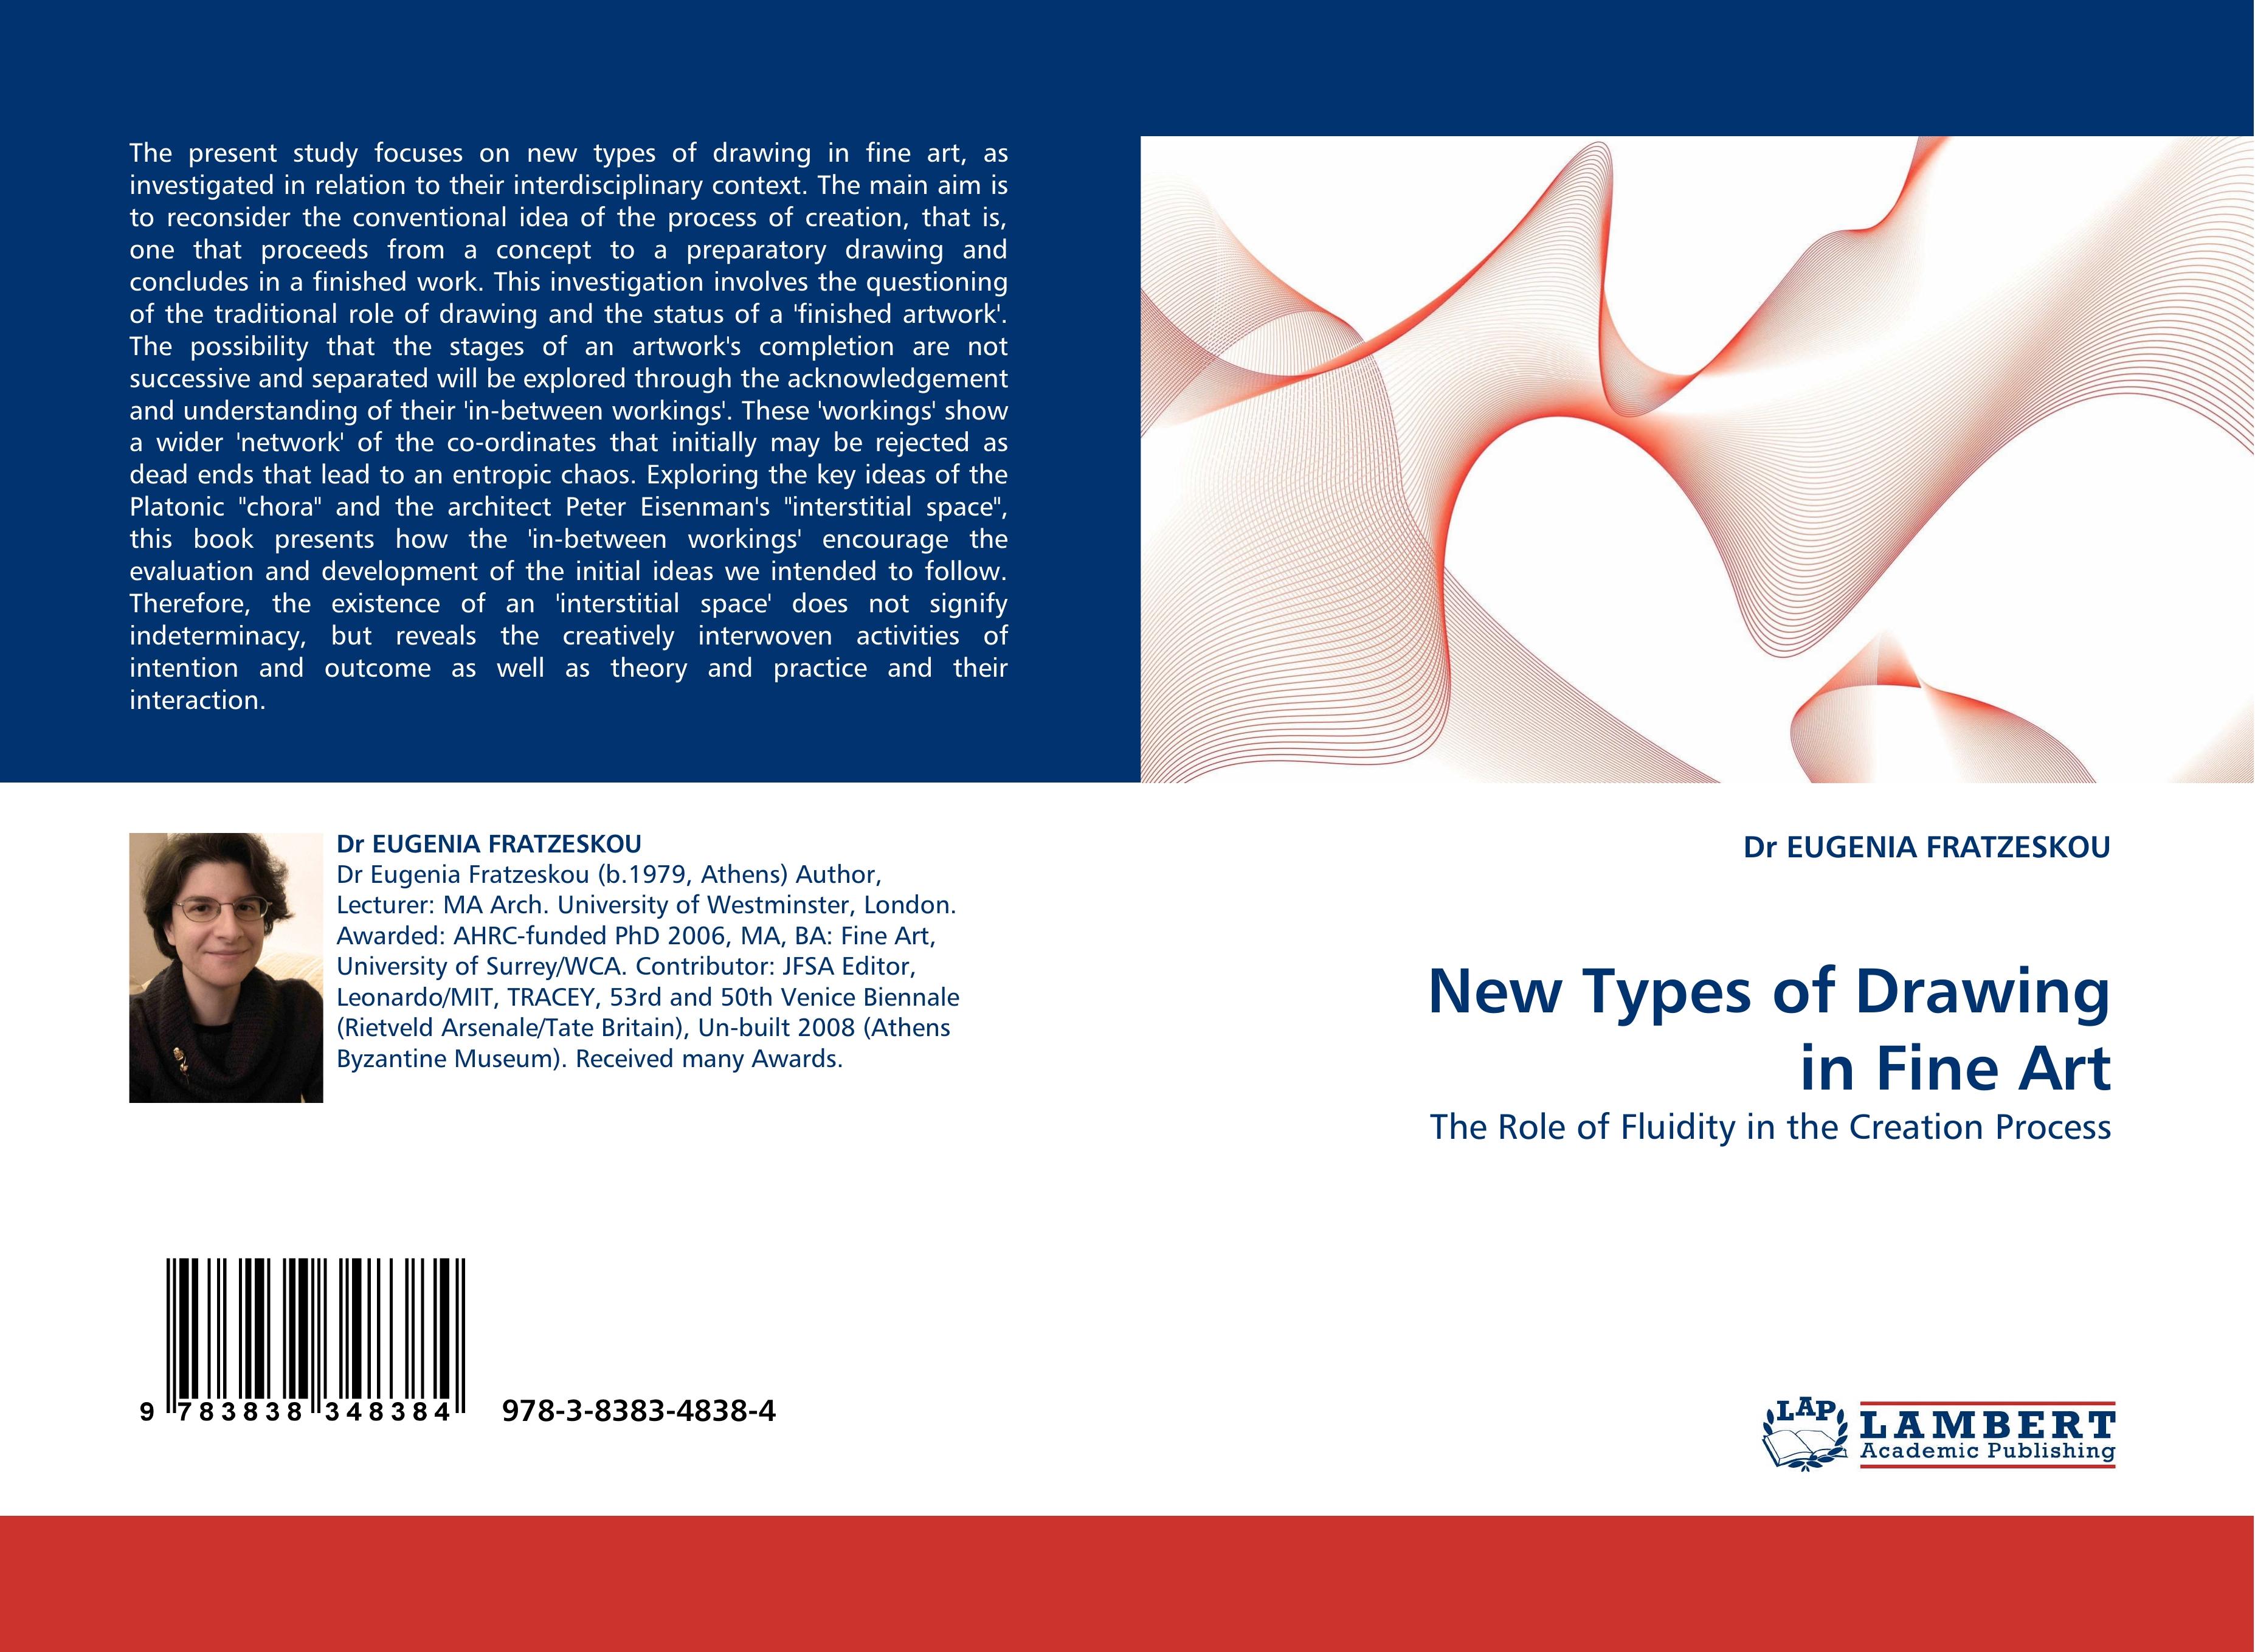 New Types of Drawing in Fine Art / The Role of Fluidity in the Creation Process / Eugenia Fratzeskou / Taschenbuch / Paperback / 64 S. / Englisch / 2010 / LAP LAMBERT Academic Publishing - Fratzeskou, Eugenia